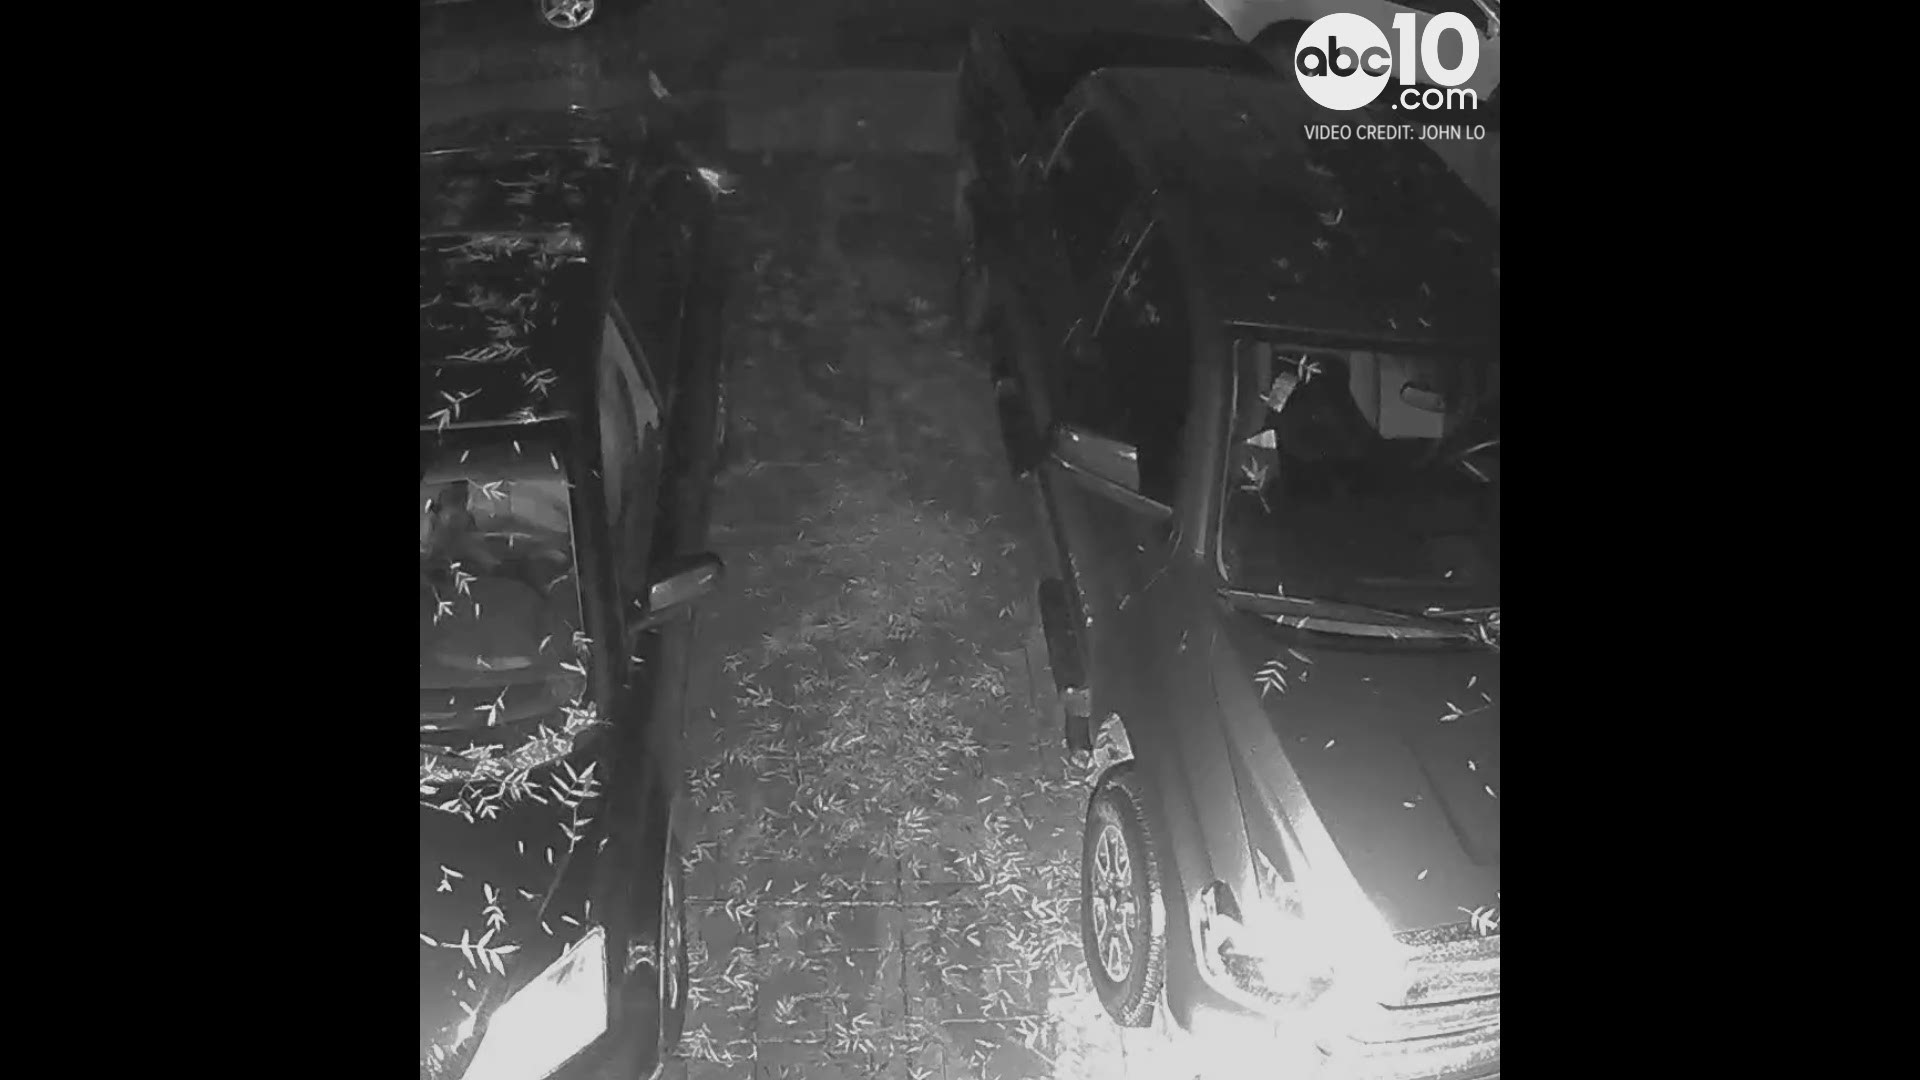 A man set up security cameras after someone tried to steal the catalytic converter from his car. A few days later, he caught the person trying to steal it again.